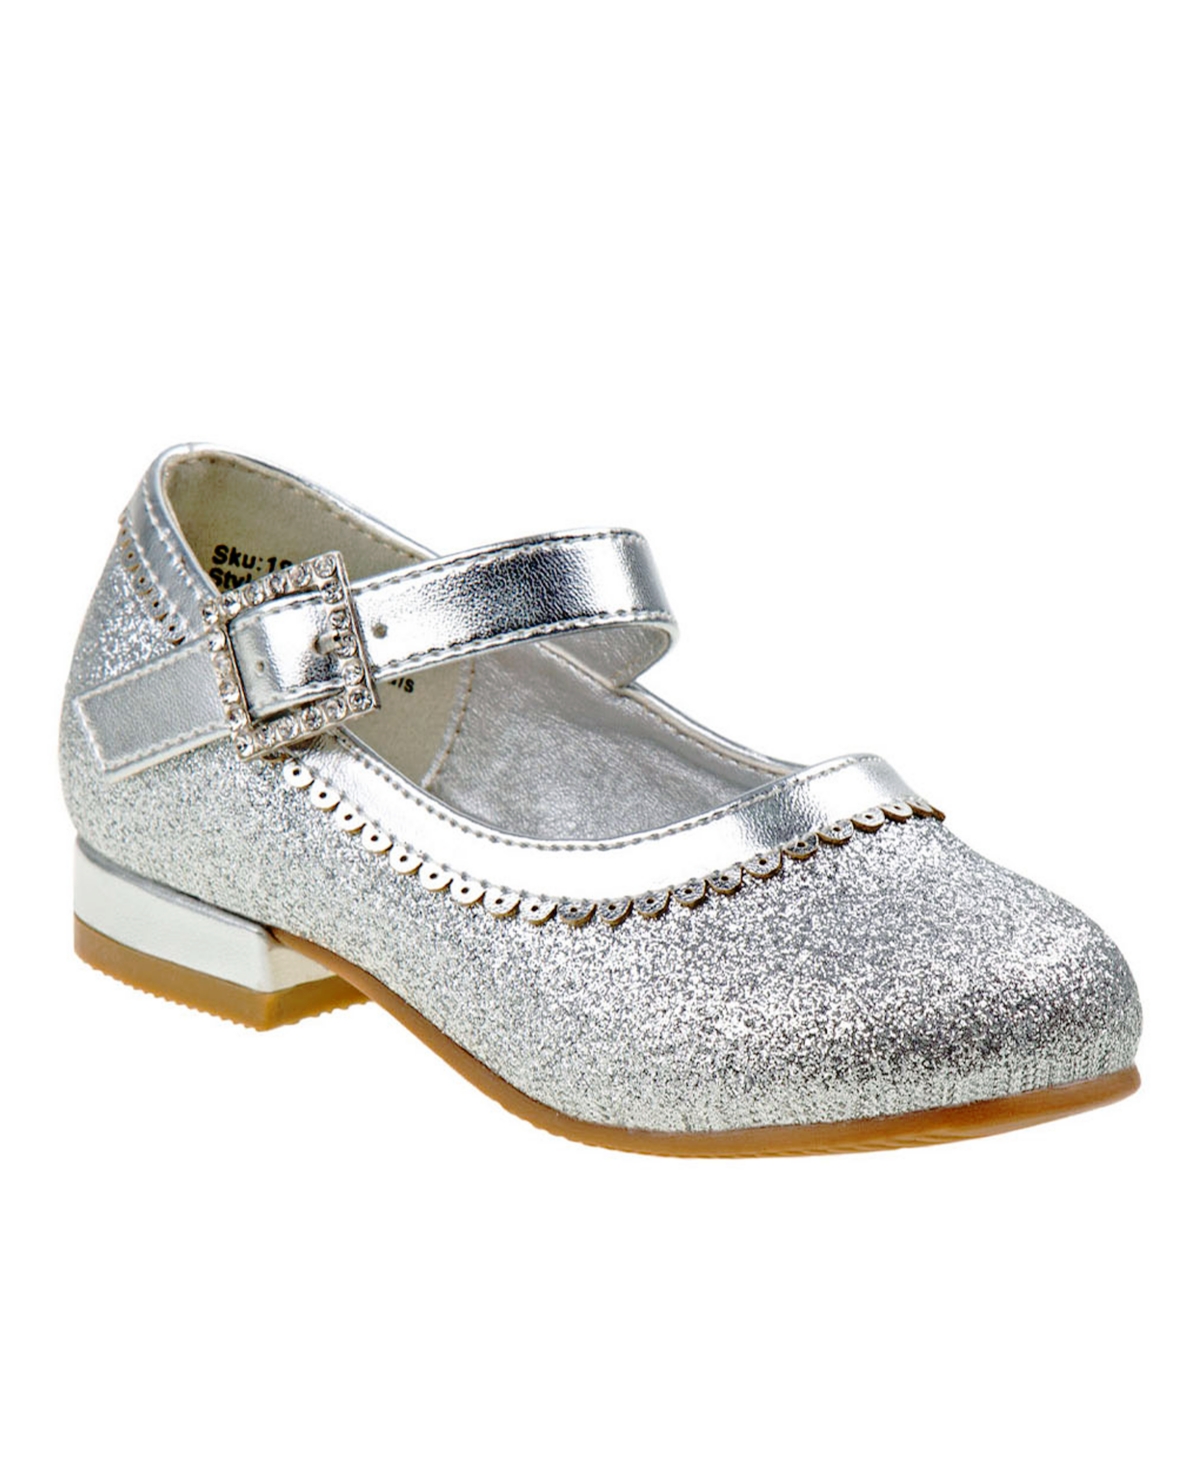 Josmo Kids' Toddler Girls Strap Low Heeled Dress Shoes In Silver Glitter